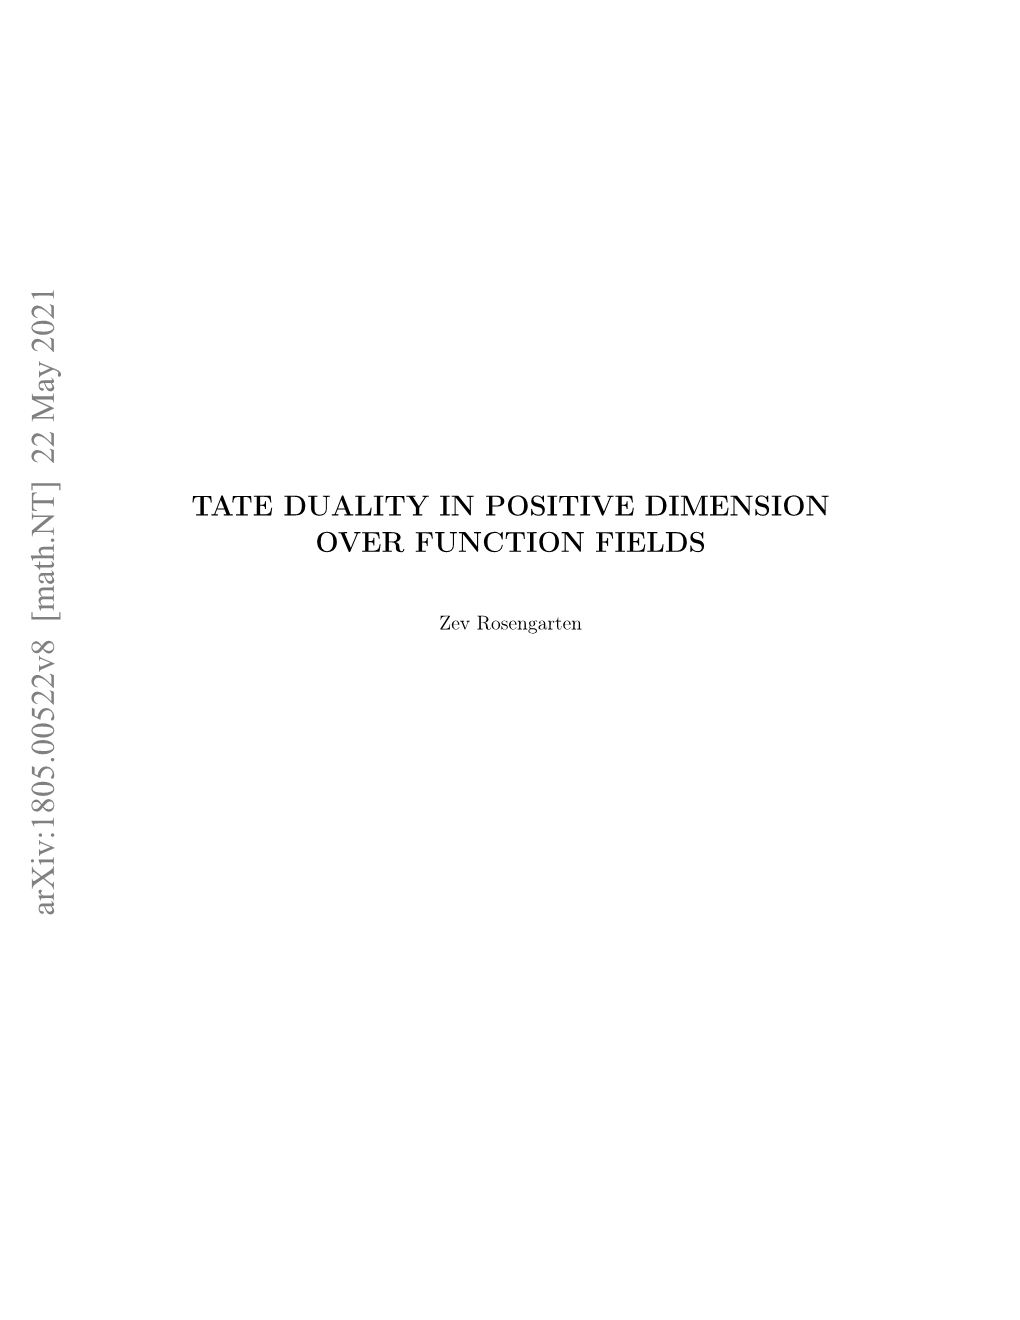 Arxiv:1805.00522V8 [Math.NT] 22 May 2021 a EDAIYI OIIEDIMENSION POSITIVE in DUALITY TATE VRFNTO FIELDS FUNCTION OVER E Rosengarten Zev Abstract